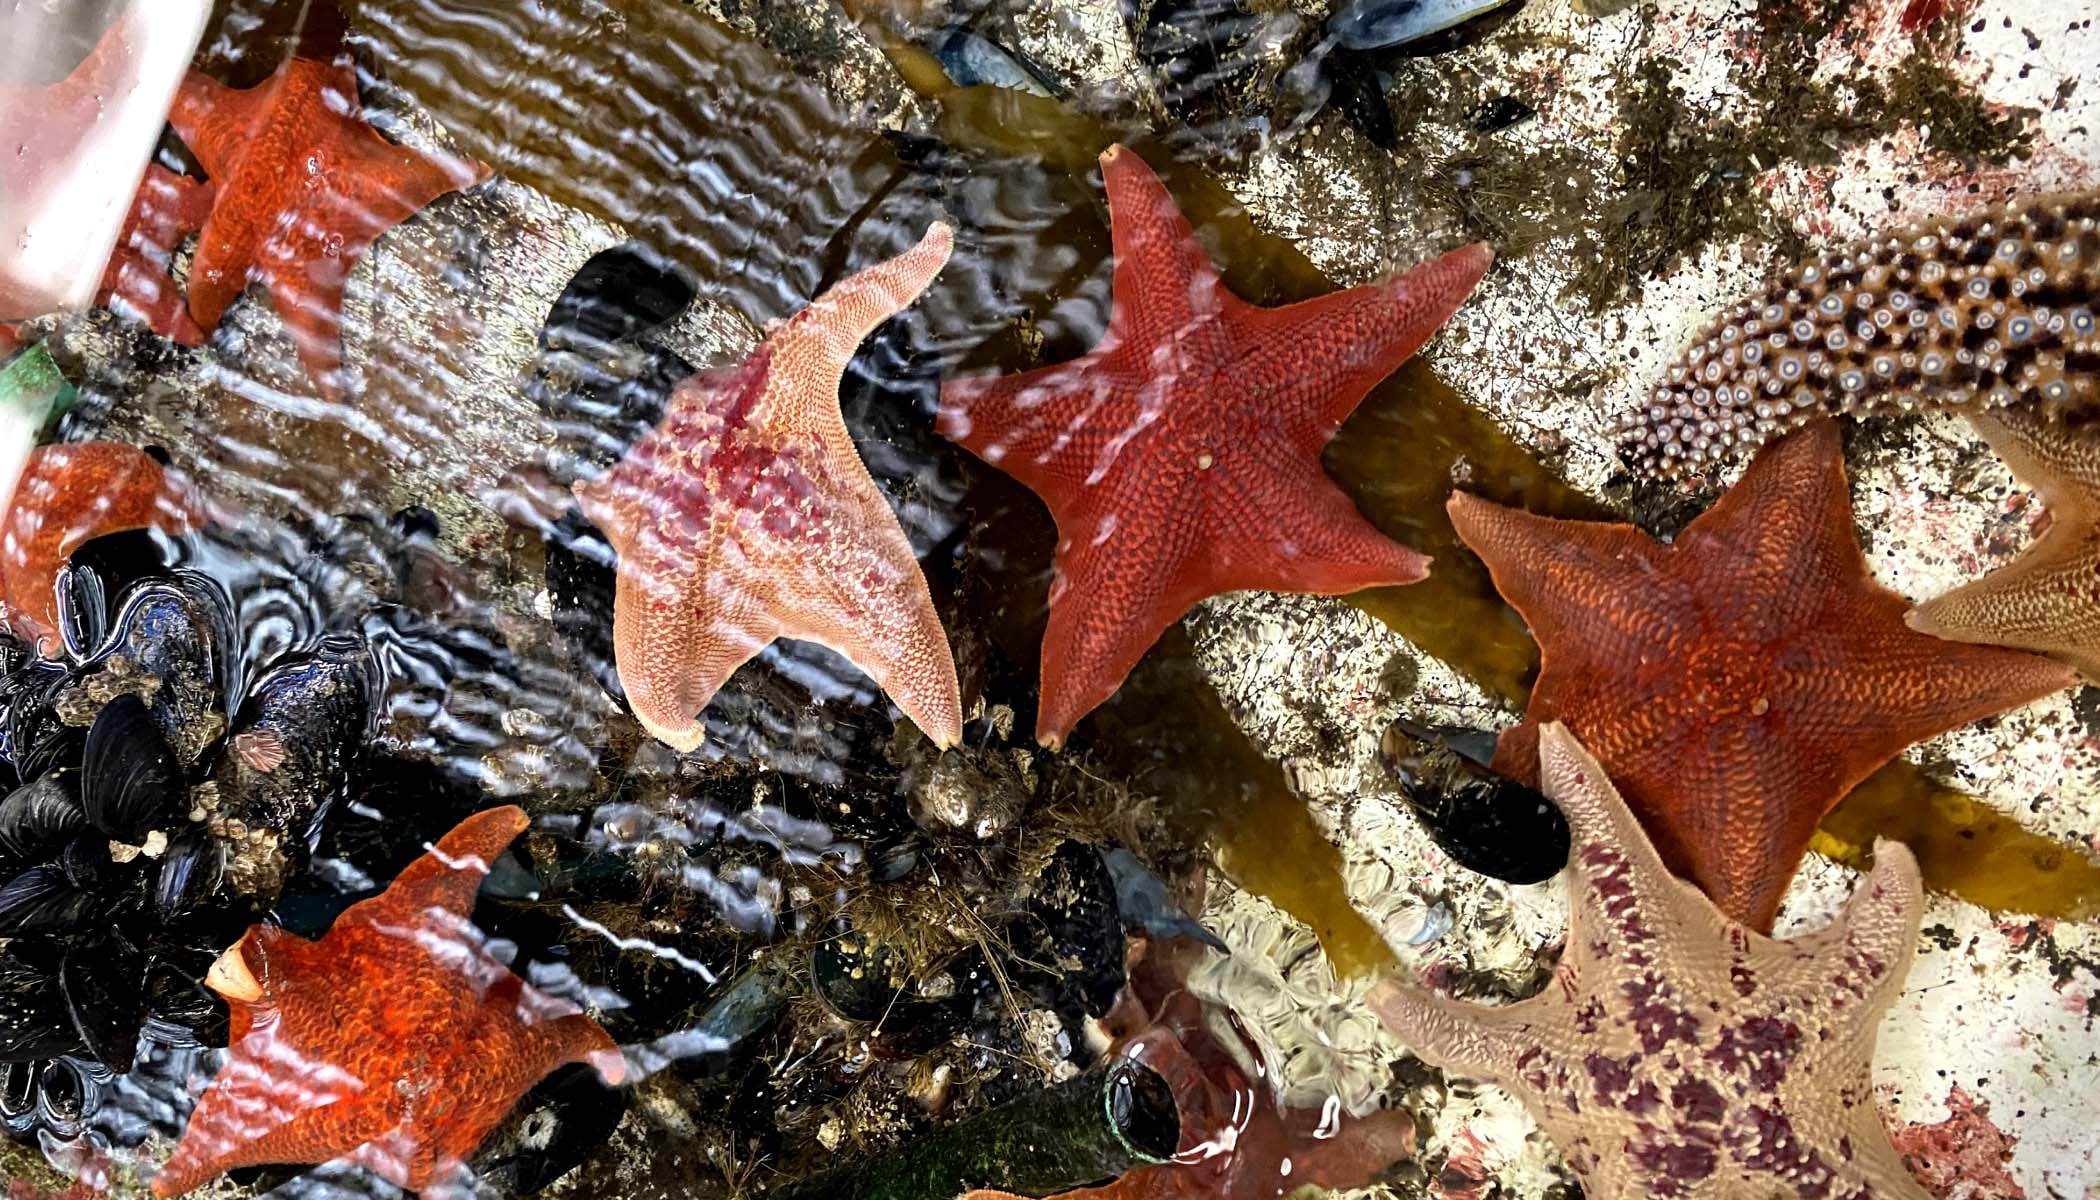 Burnt orange- and peach-colored starfish in a marine environment.